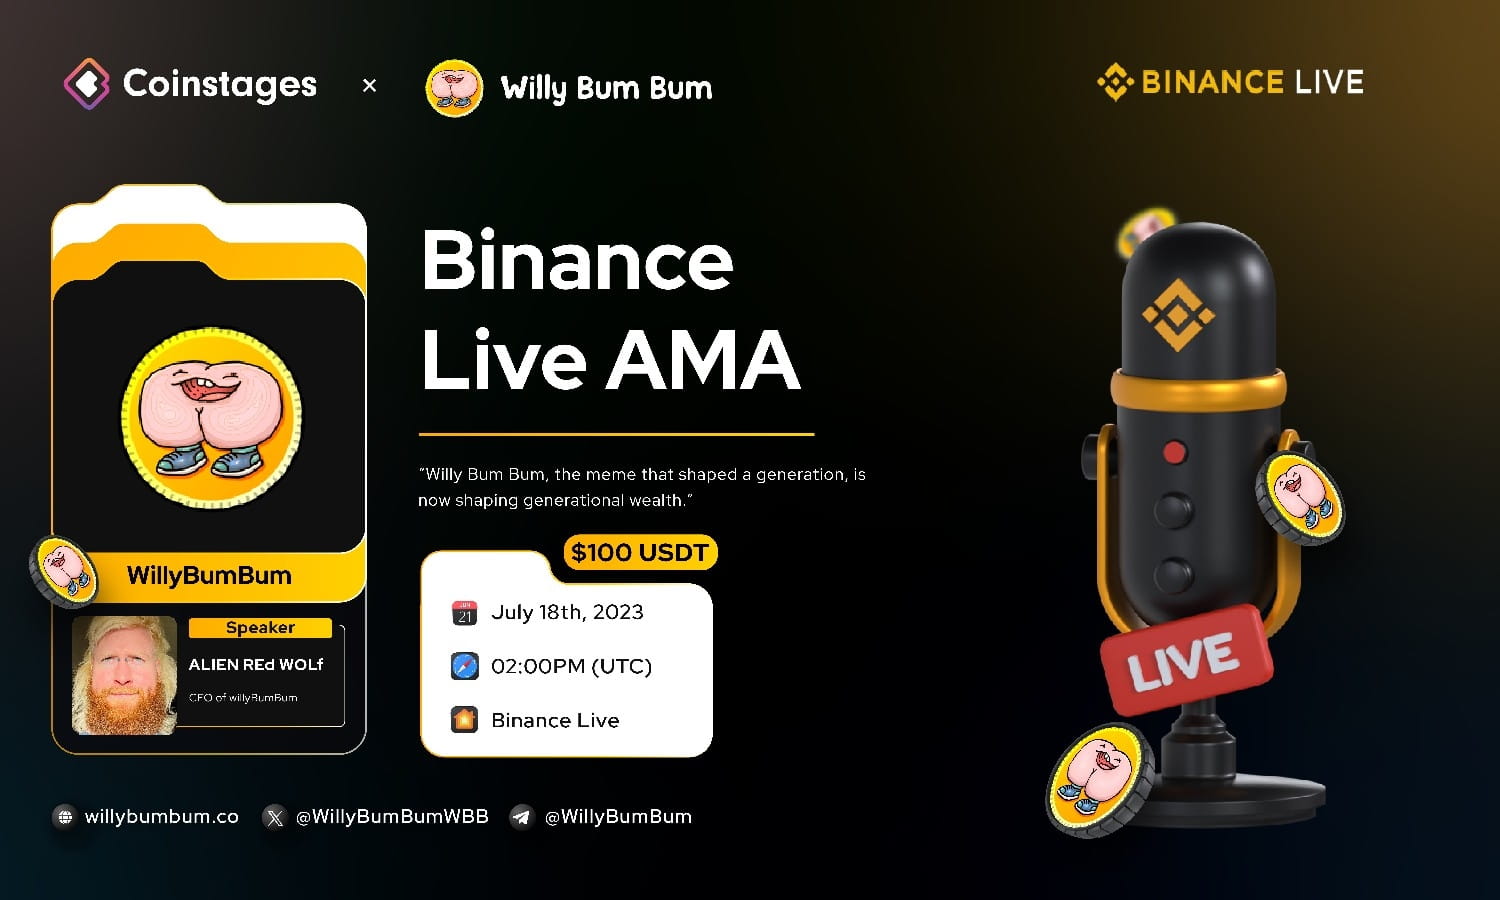 Coinstages Live AMA: Featuring Willy Bum Bum